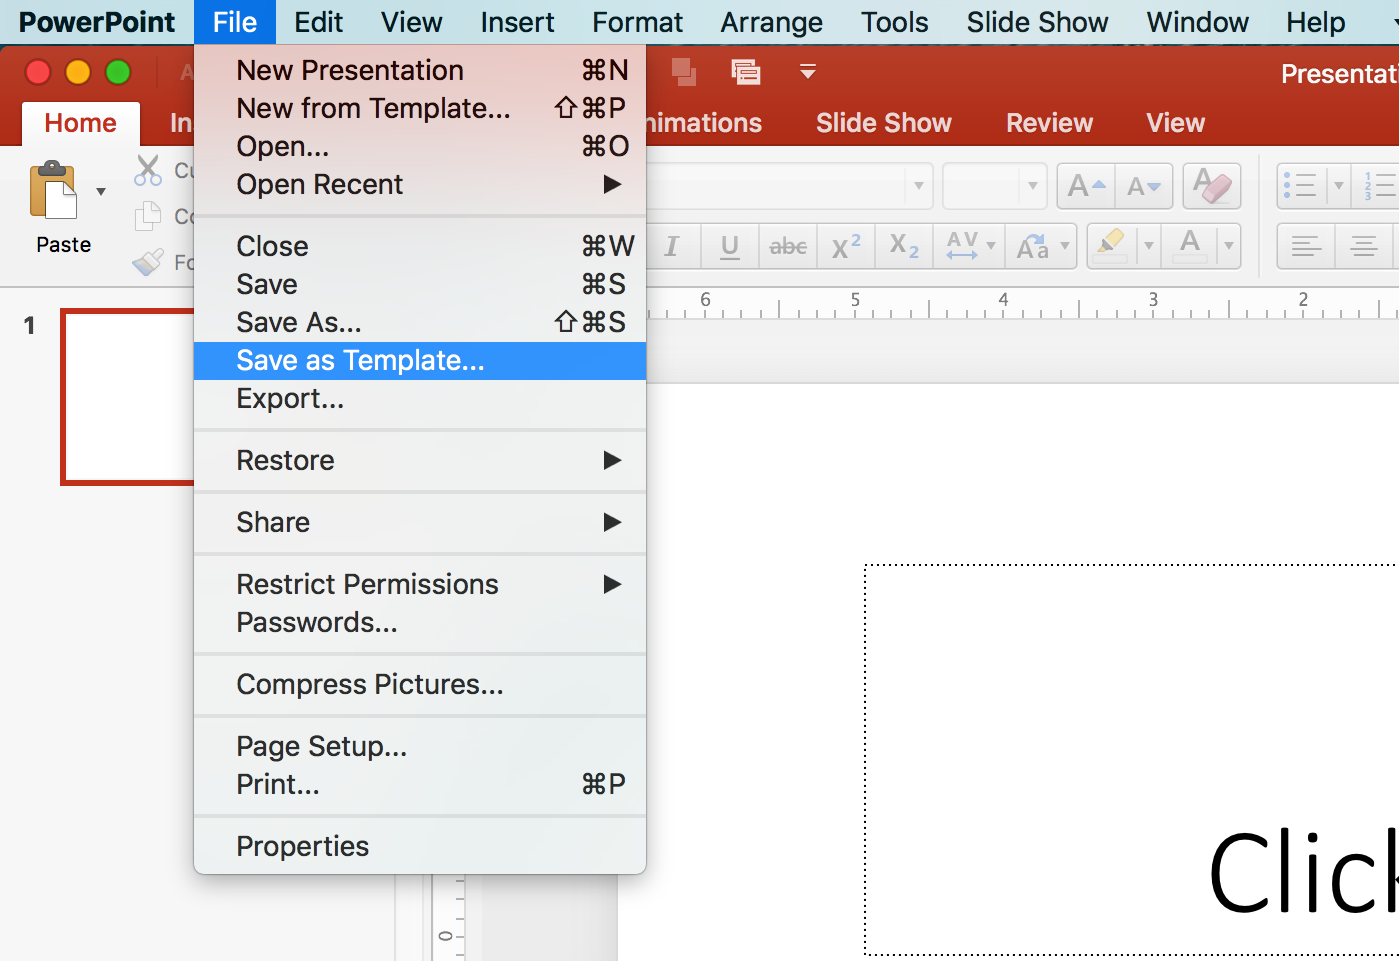 PowerPoint Tips: Save As Template